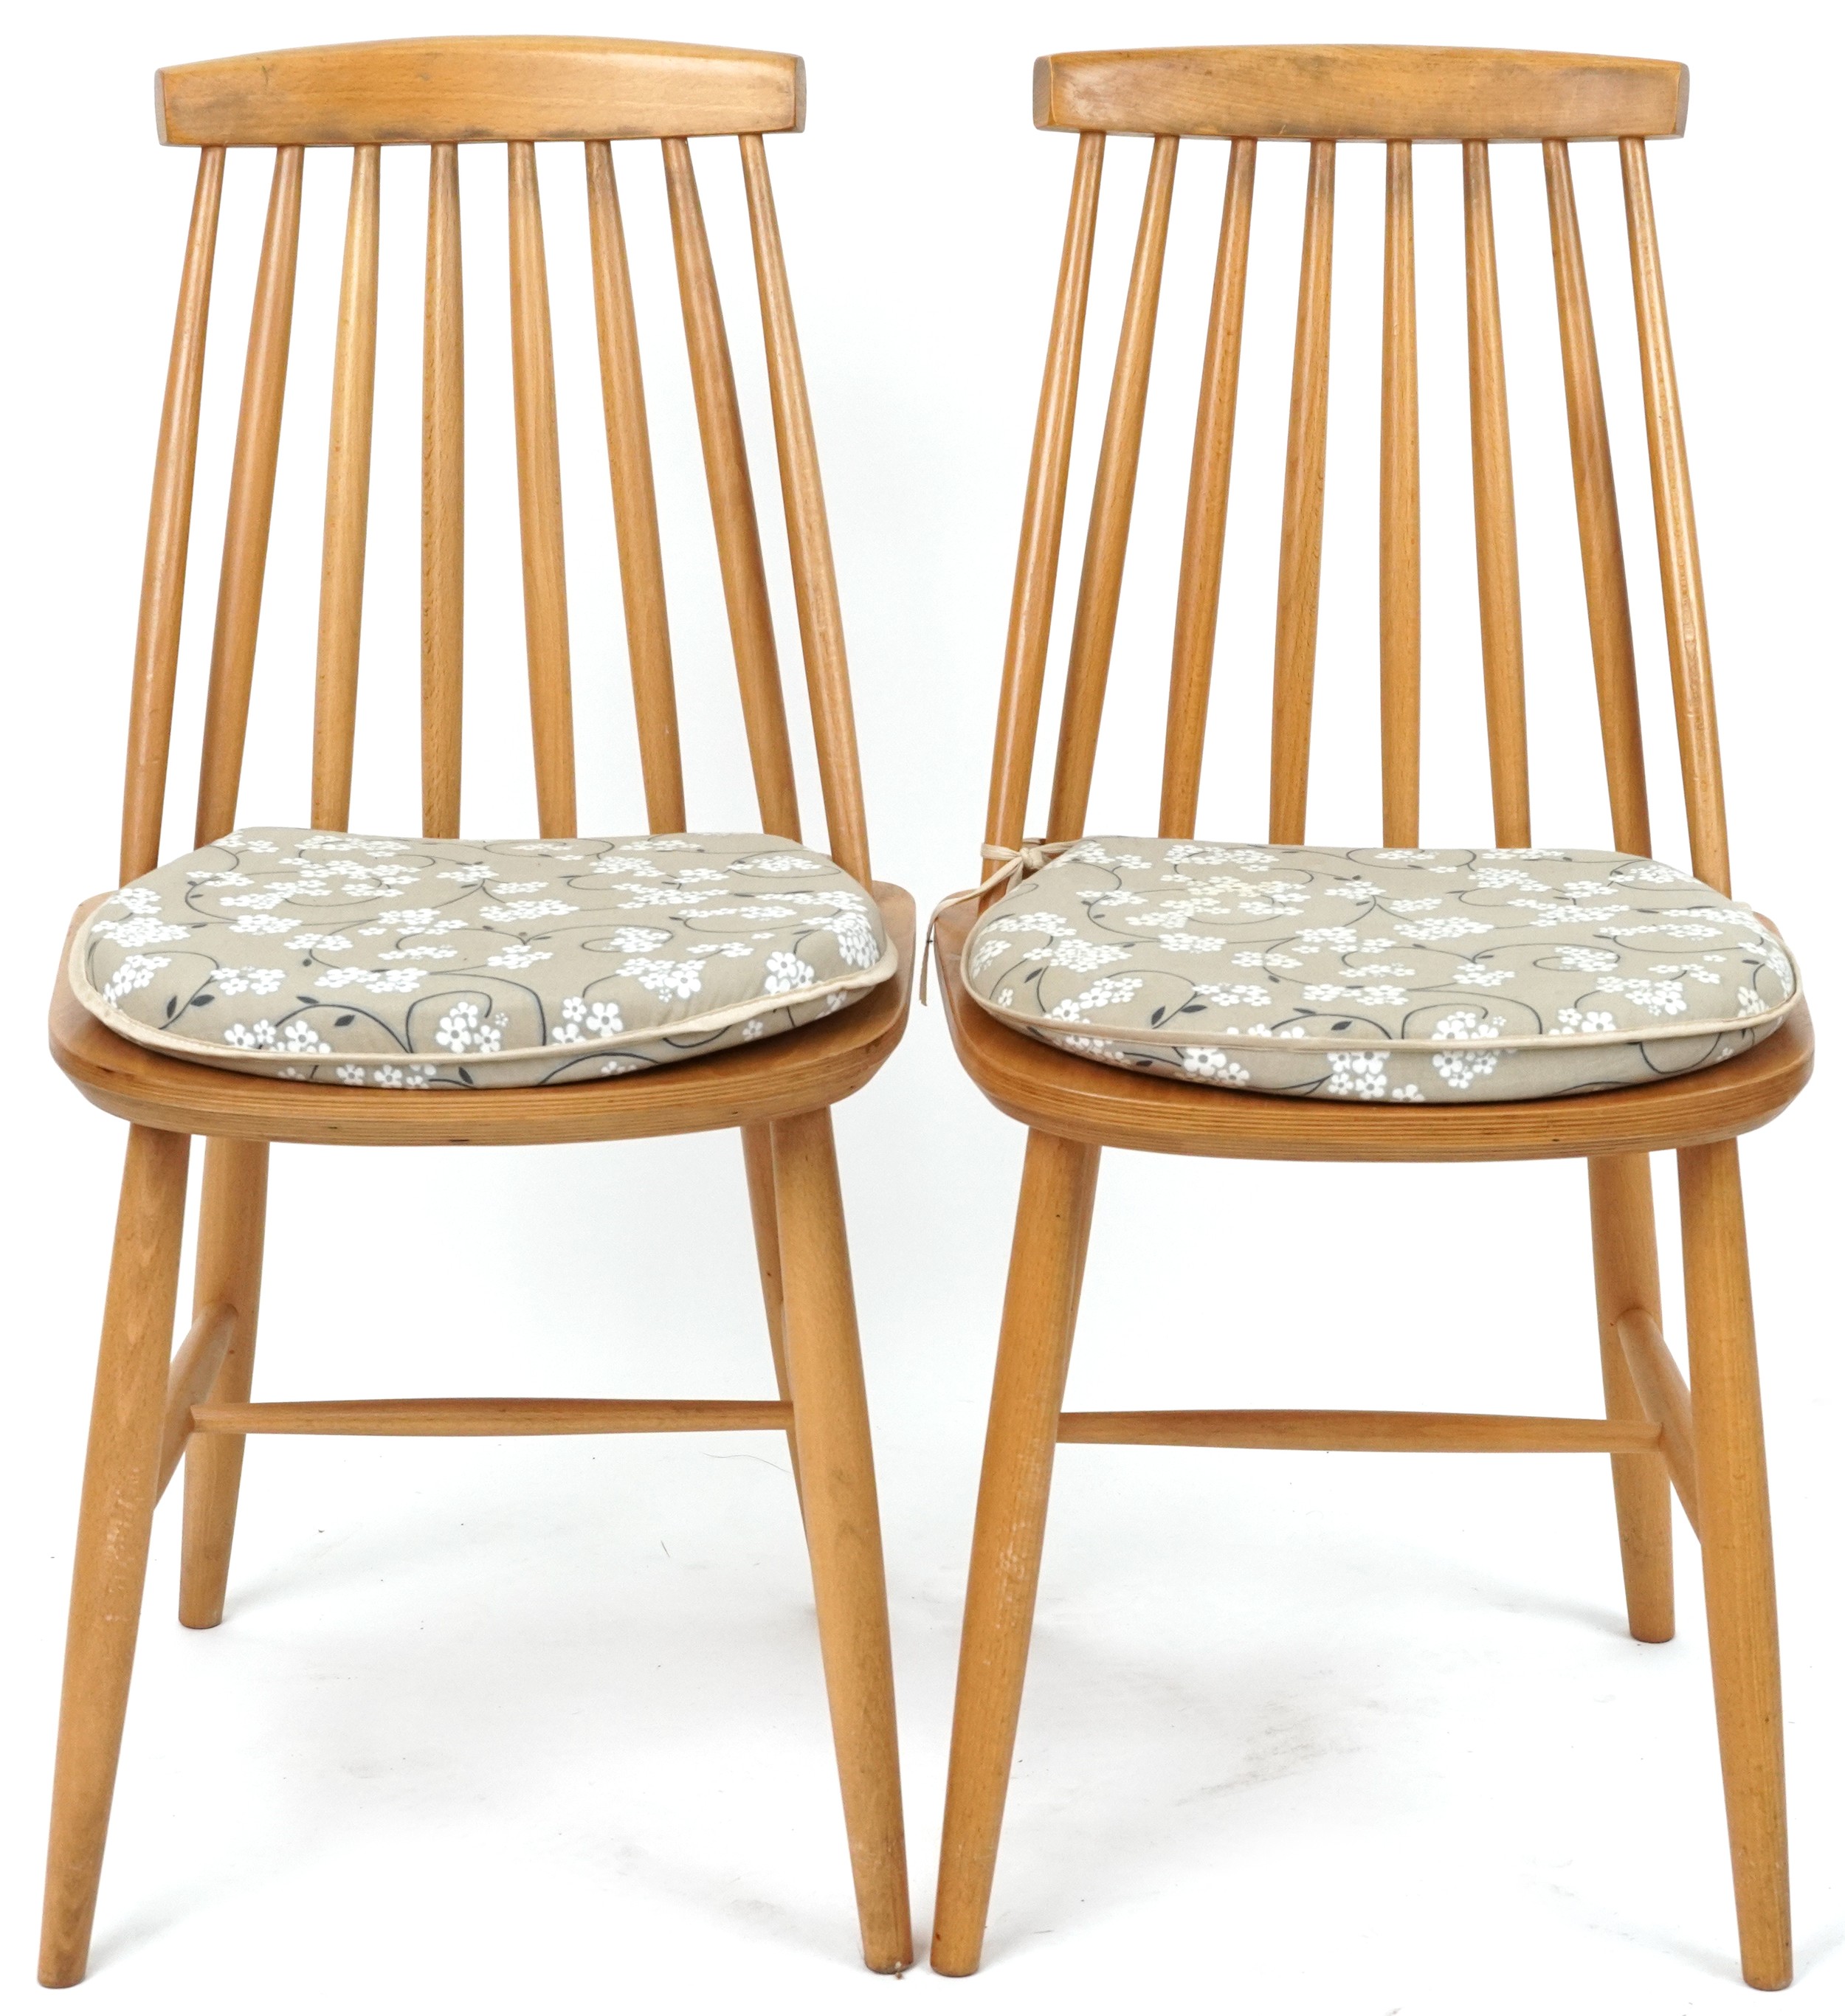 Ercol style lightwood drop end dining table with two stick back chairs, the table 74cm H x 55cm W - Image 7 of 9